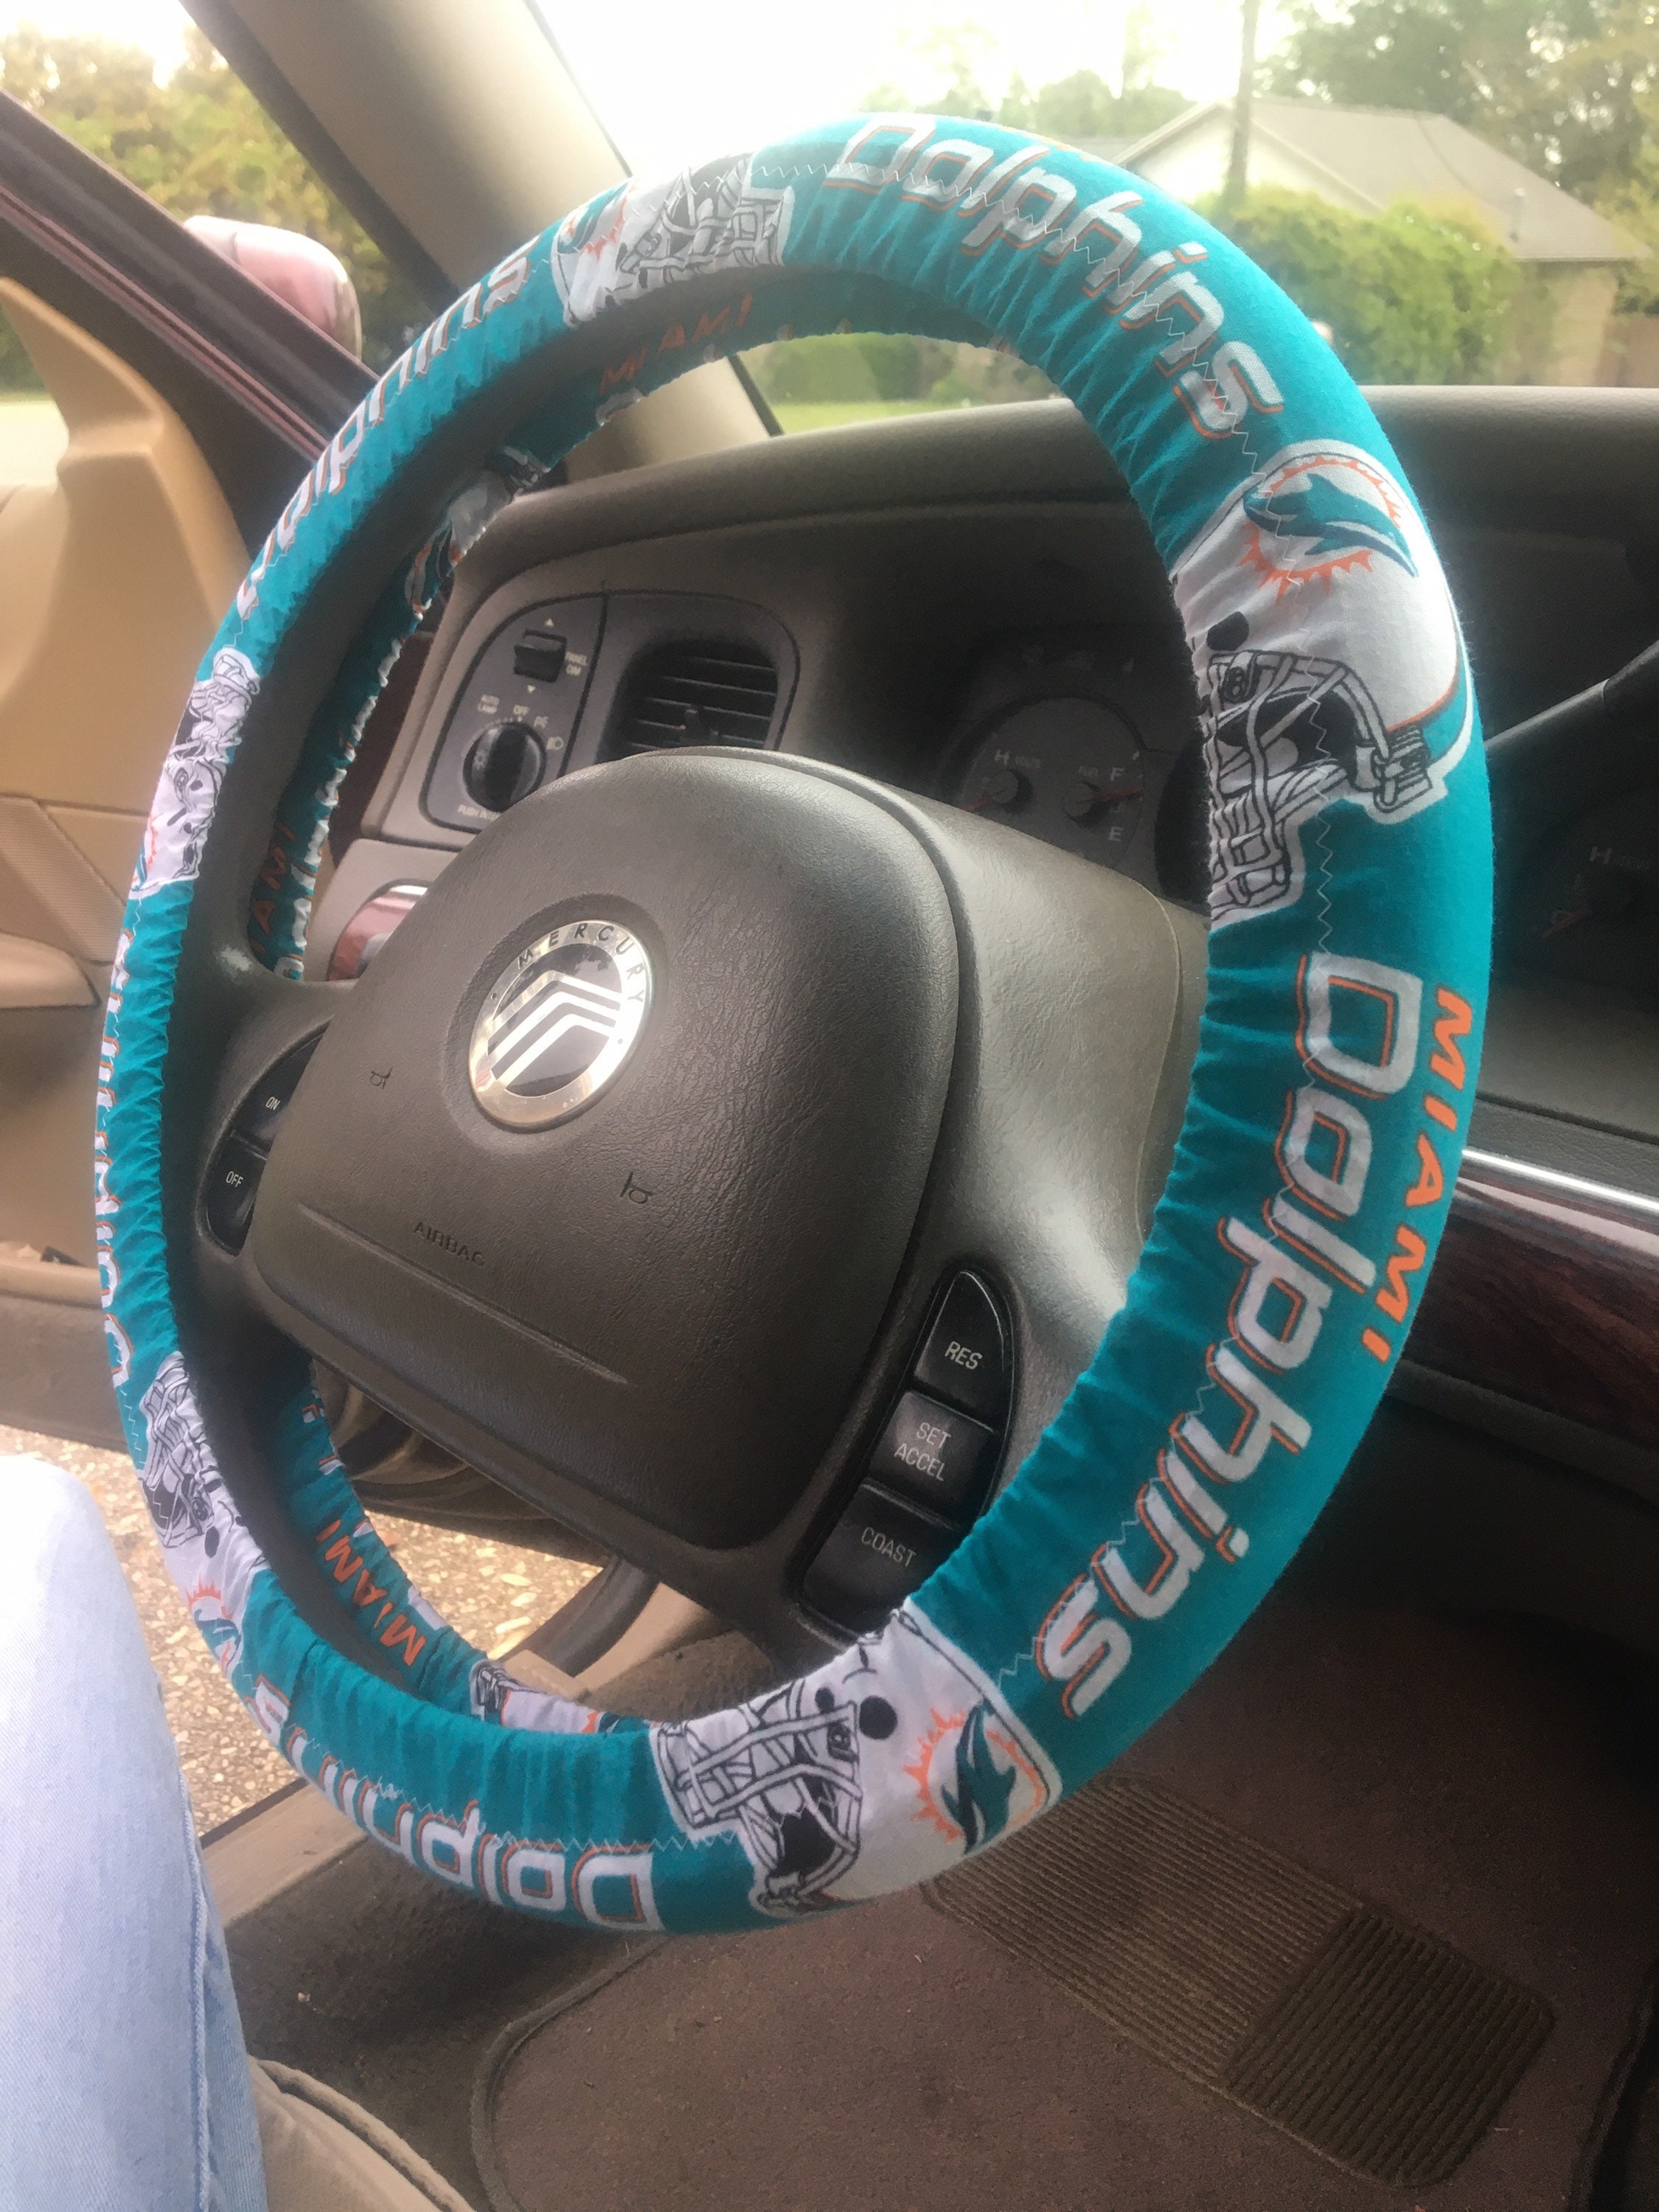 MIAMI DOLPHINS Steering Wheel Cover